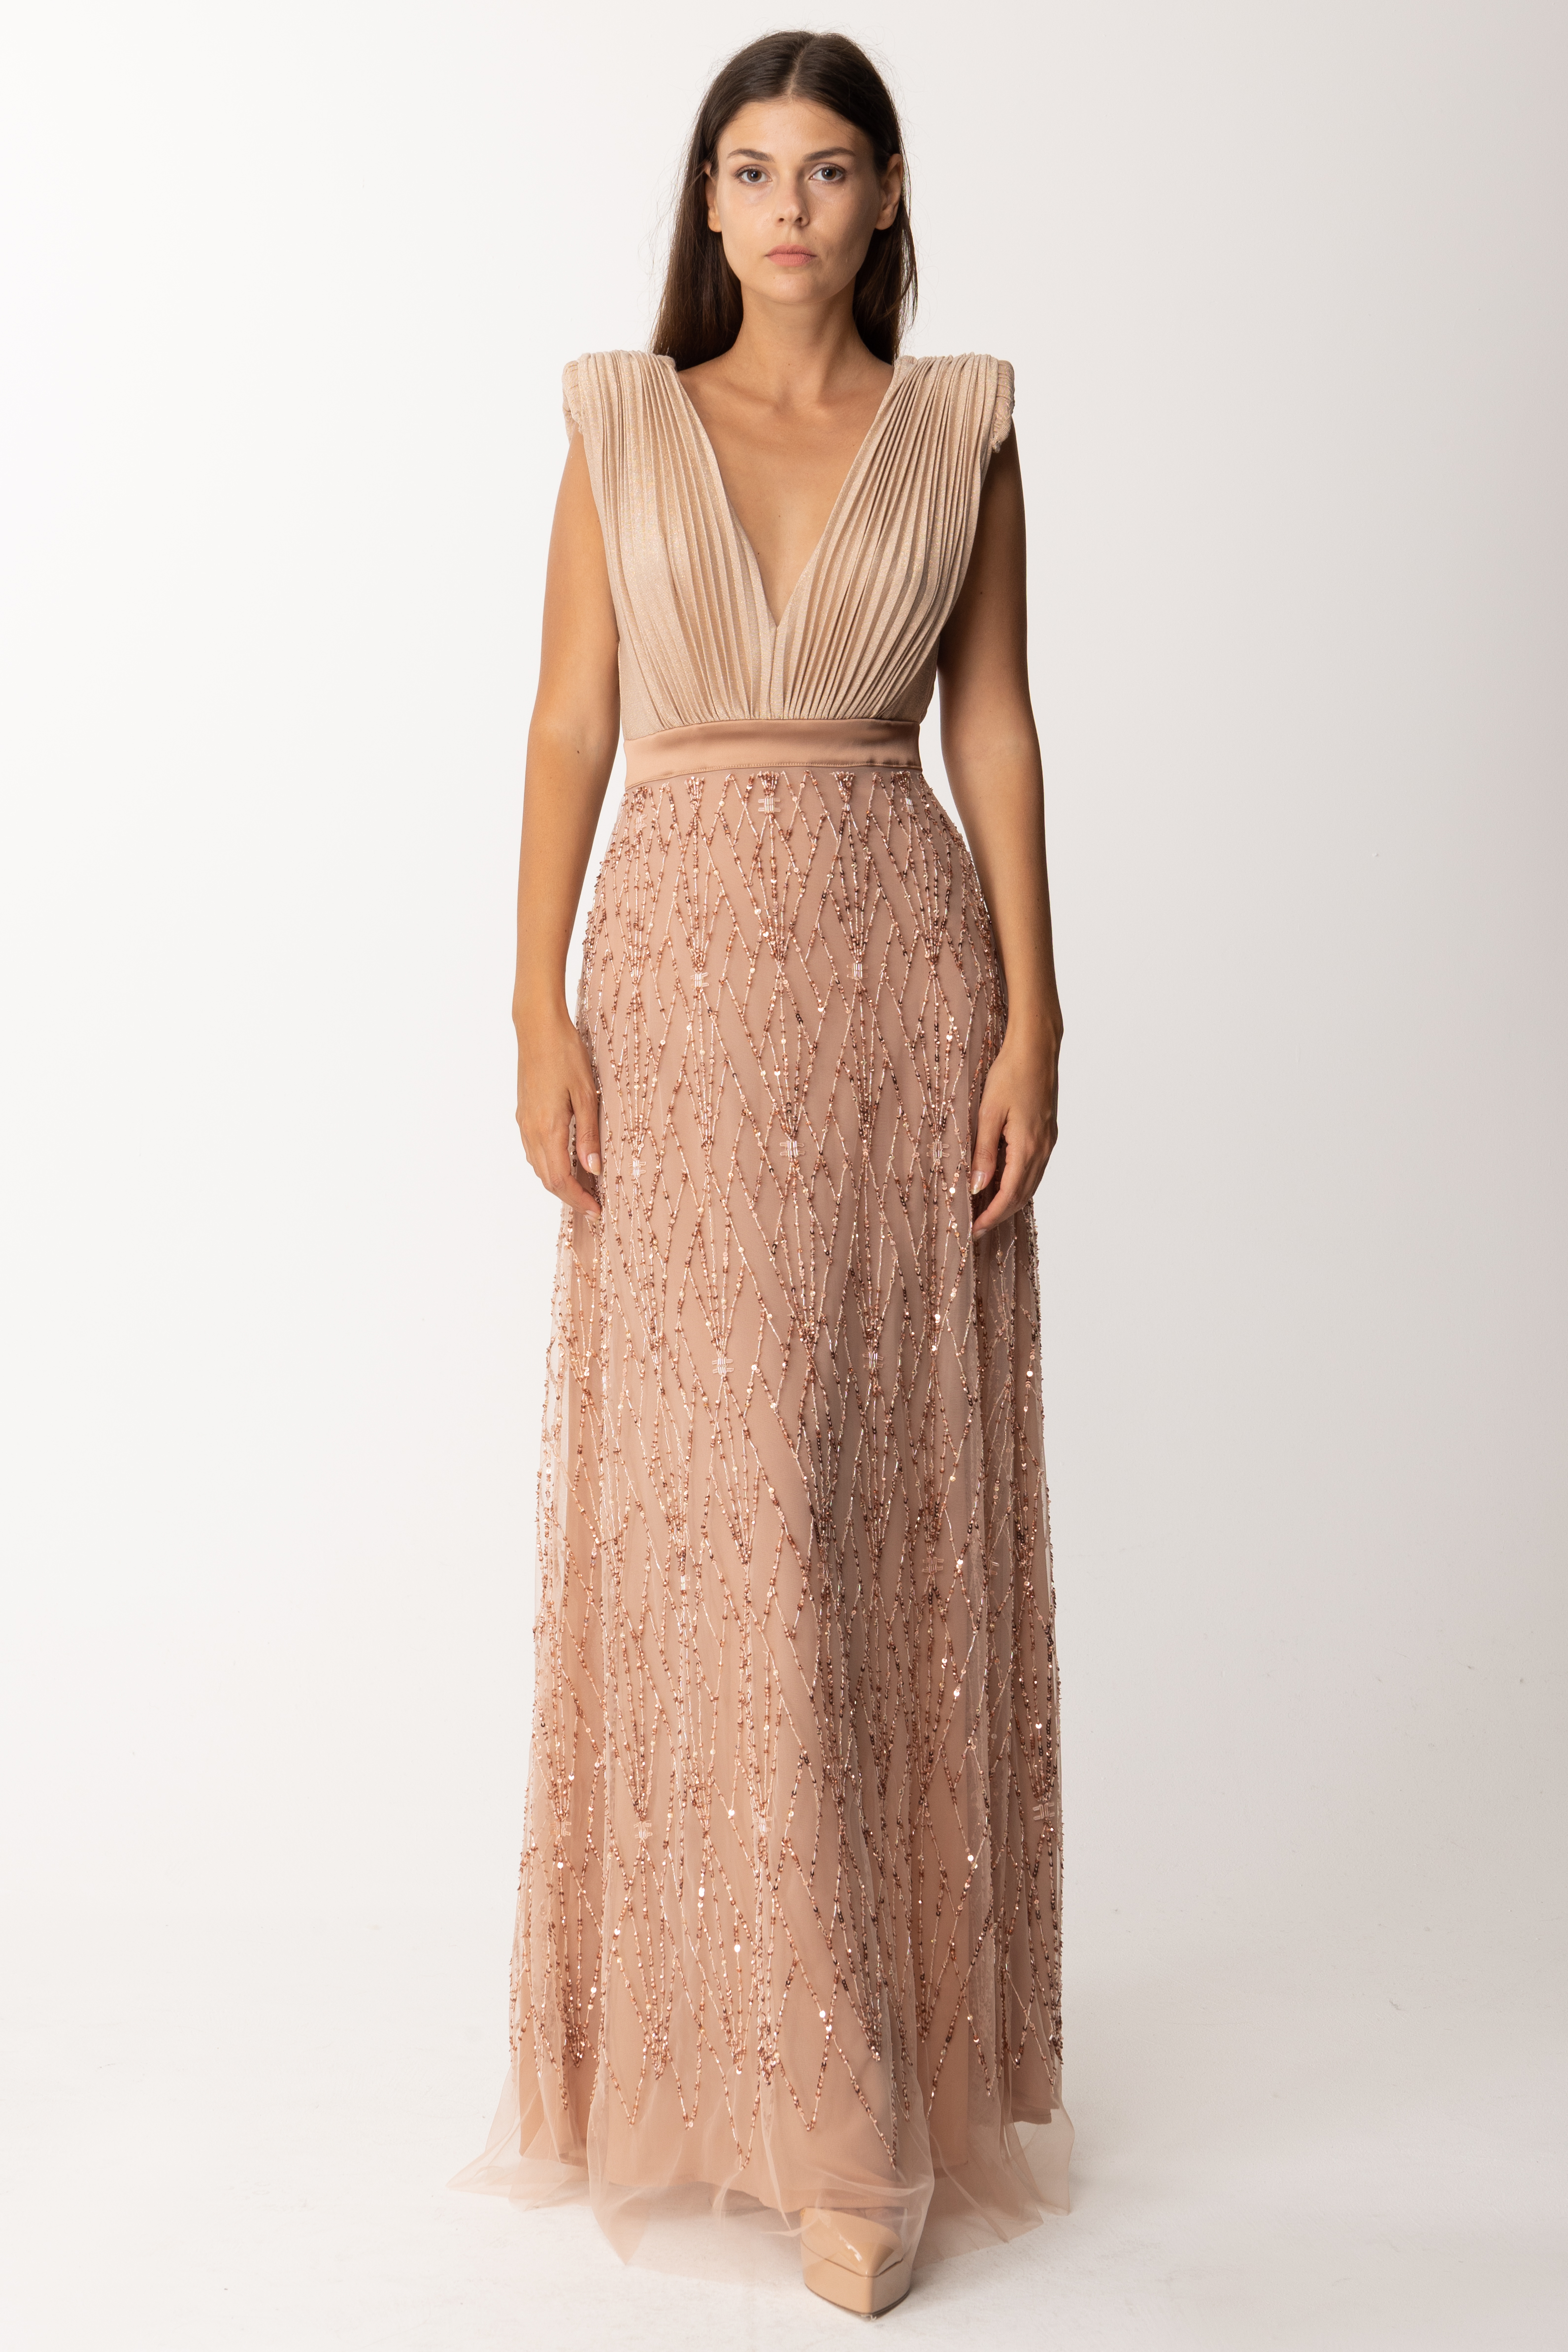 Preview: Elisabetta Franchi Red carpet dress with embroidery Carne